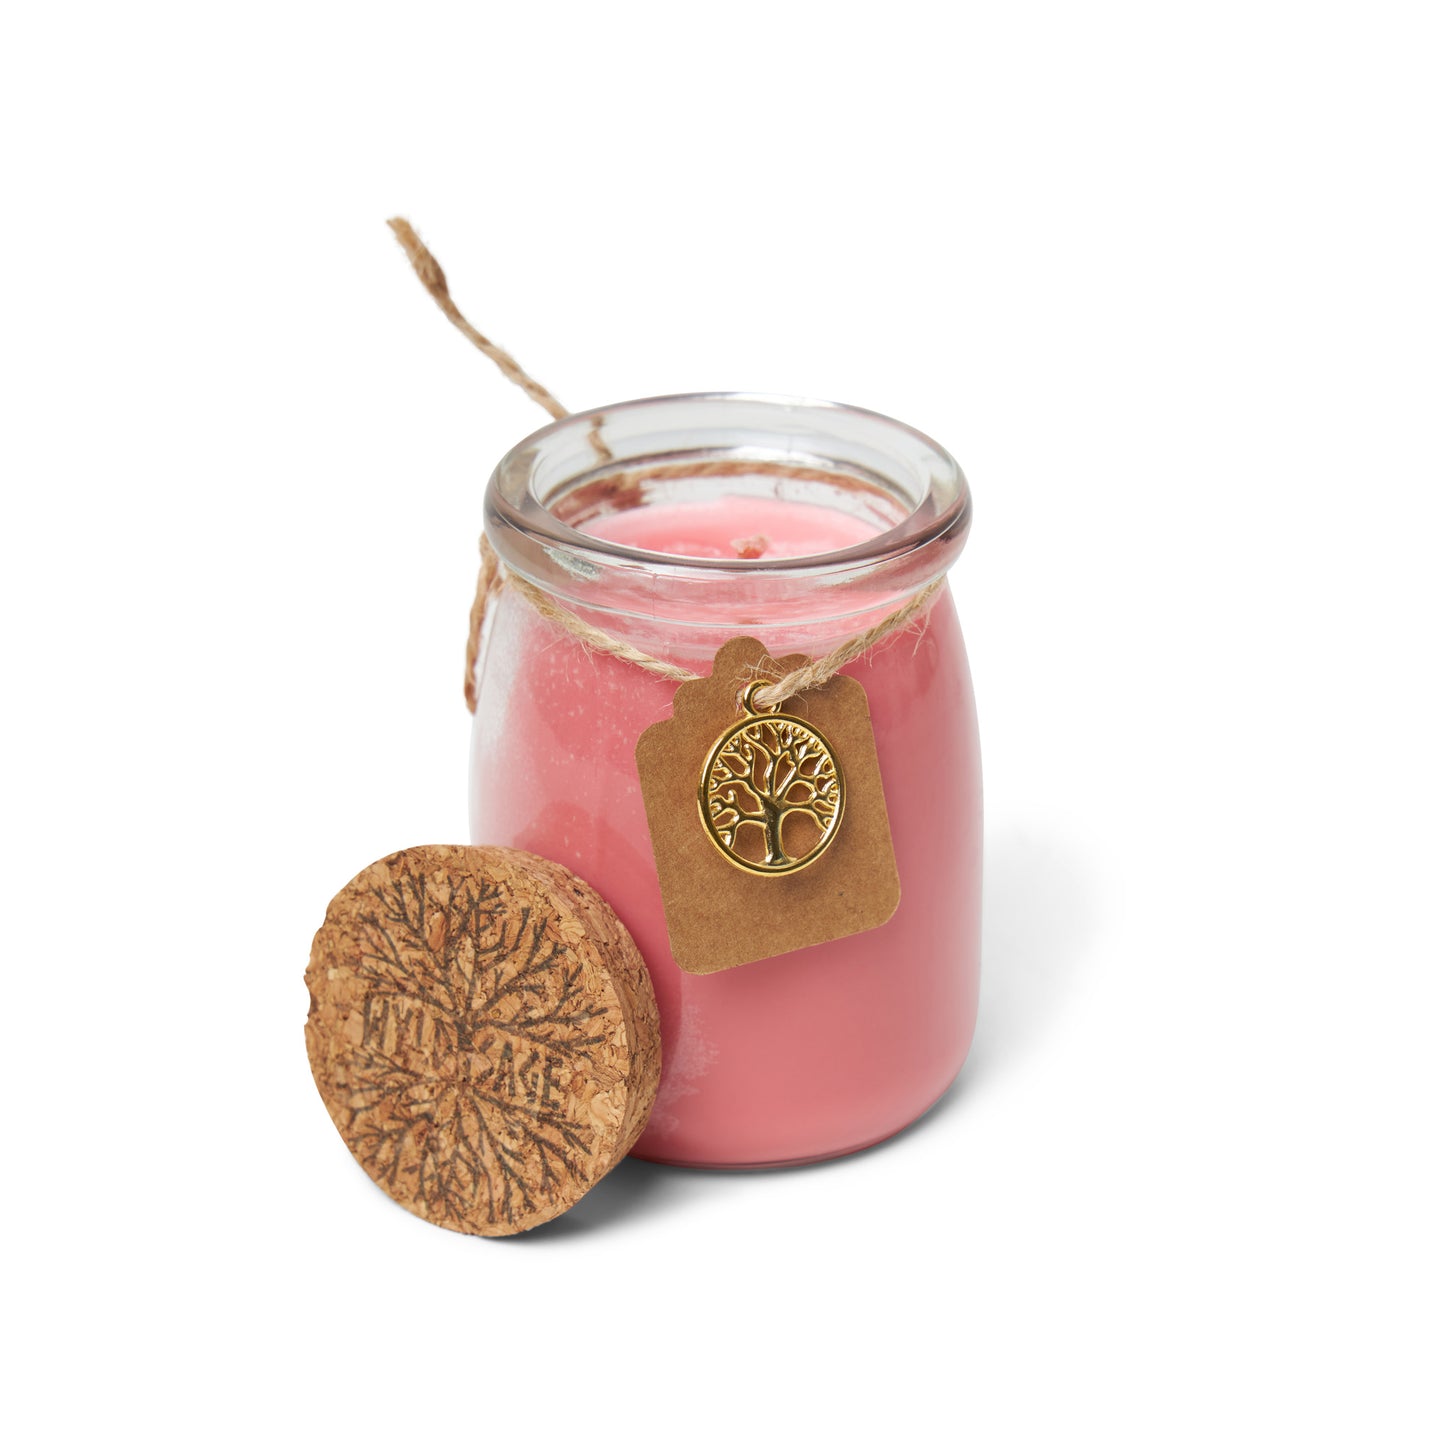 Minor Health Potion Candle